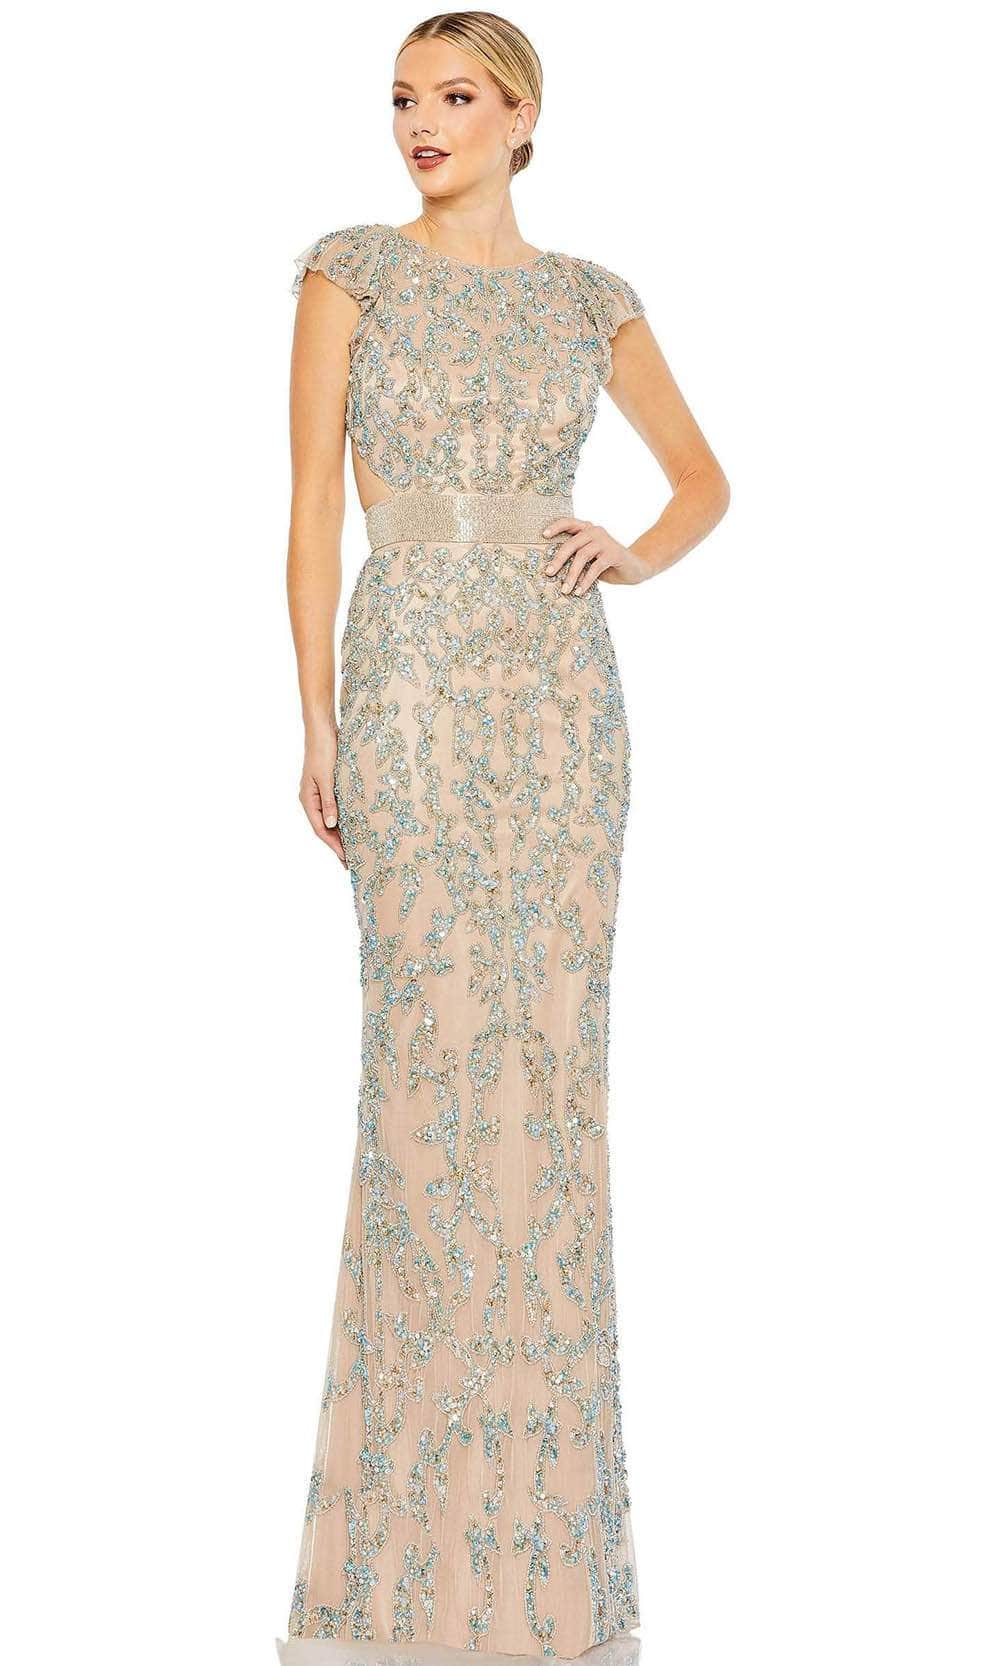 Image of Mac Duggal 5689 - Embellished Bodice Evening Gown